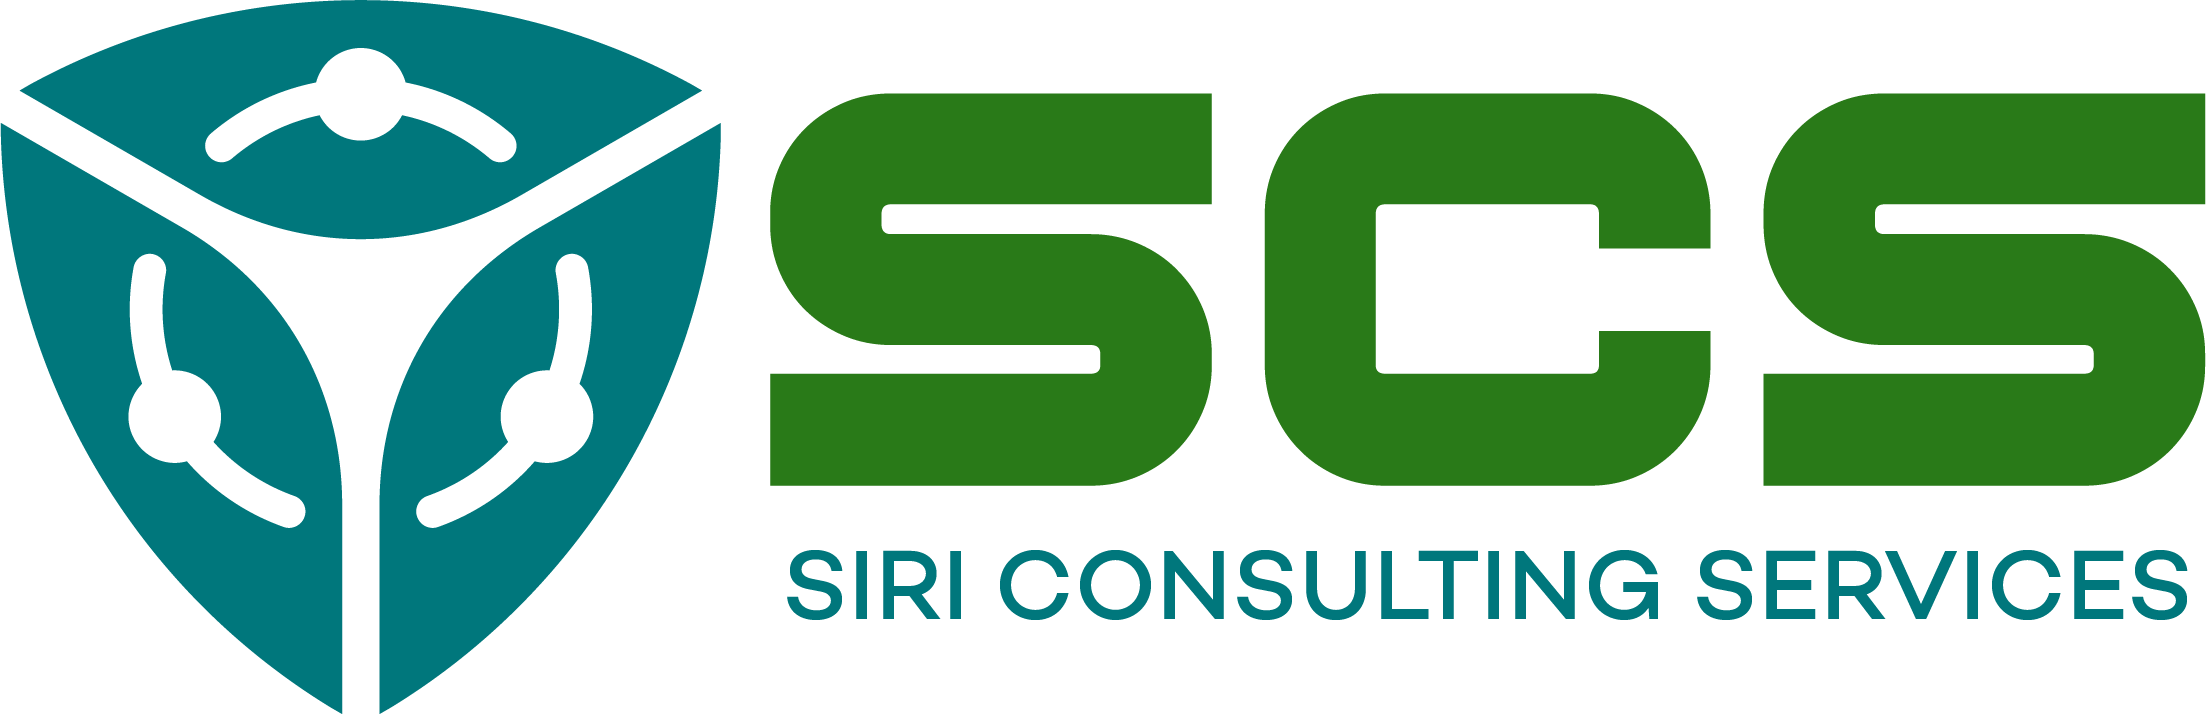 Siri Consulting Services - Cyber Security Agency USA